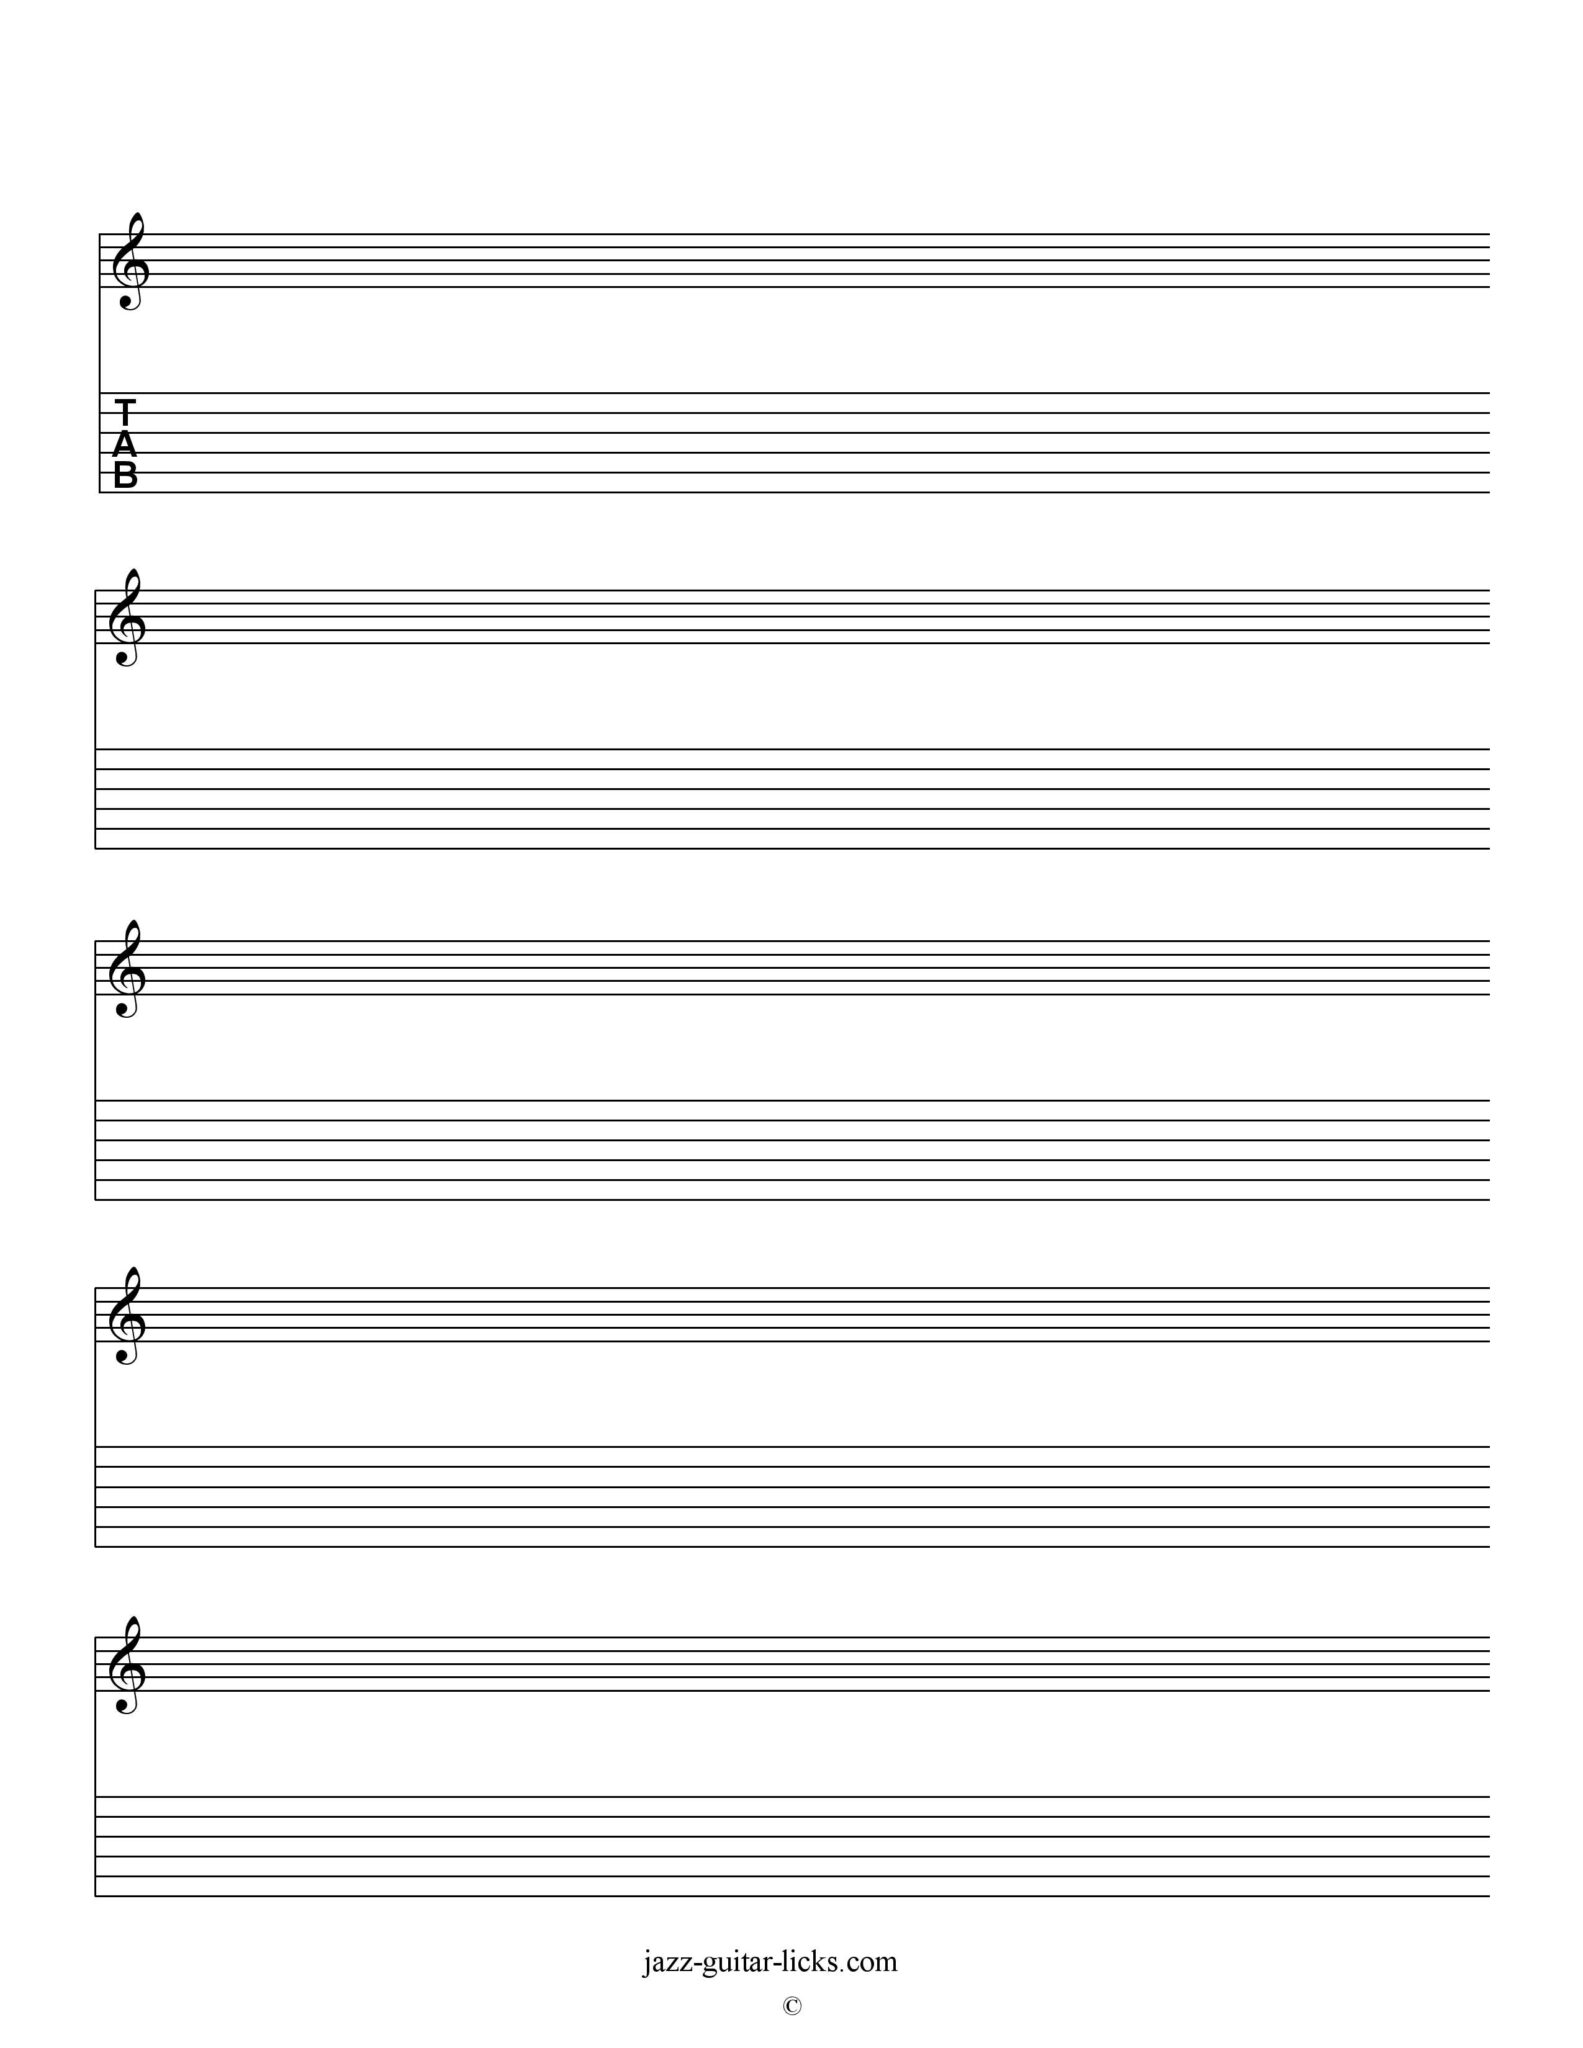 printable-blank-staves-and-tabs-free-music-sheet-jazz-throughout